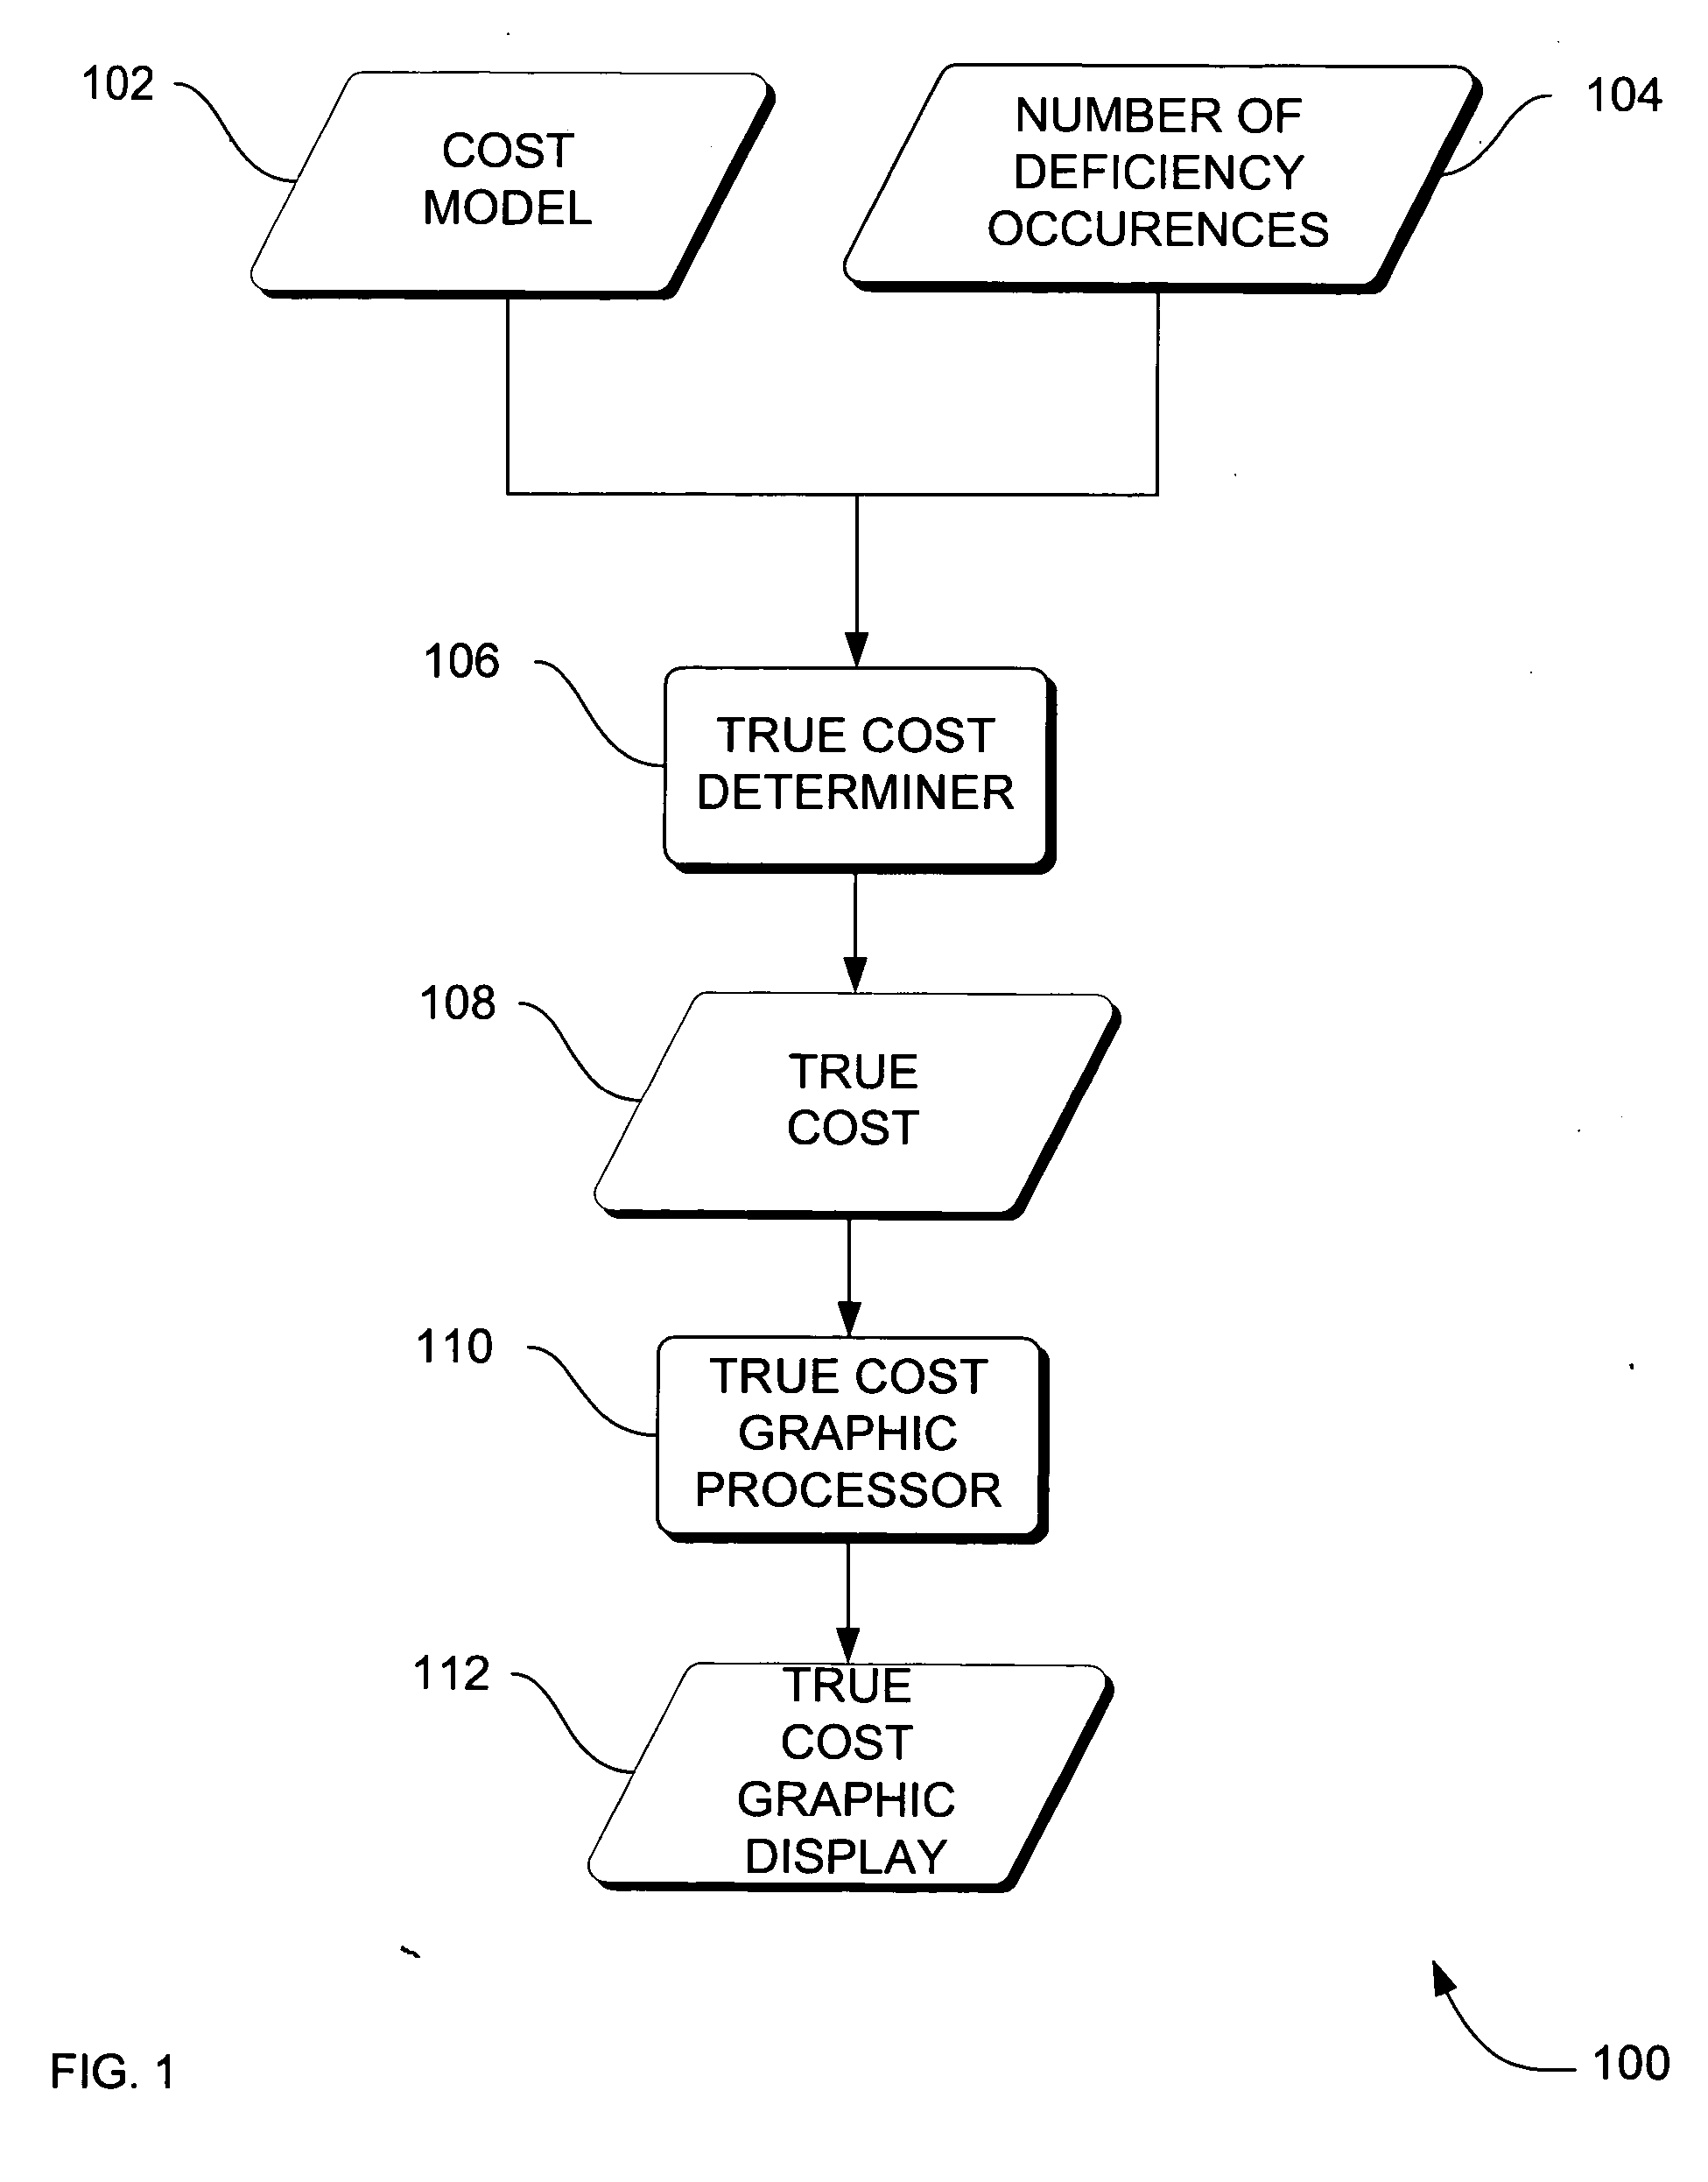 Systems, methods and apparatus for cost analysis of medical devices